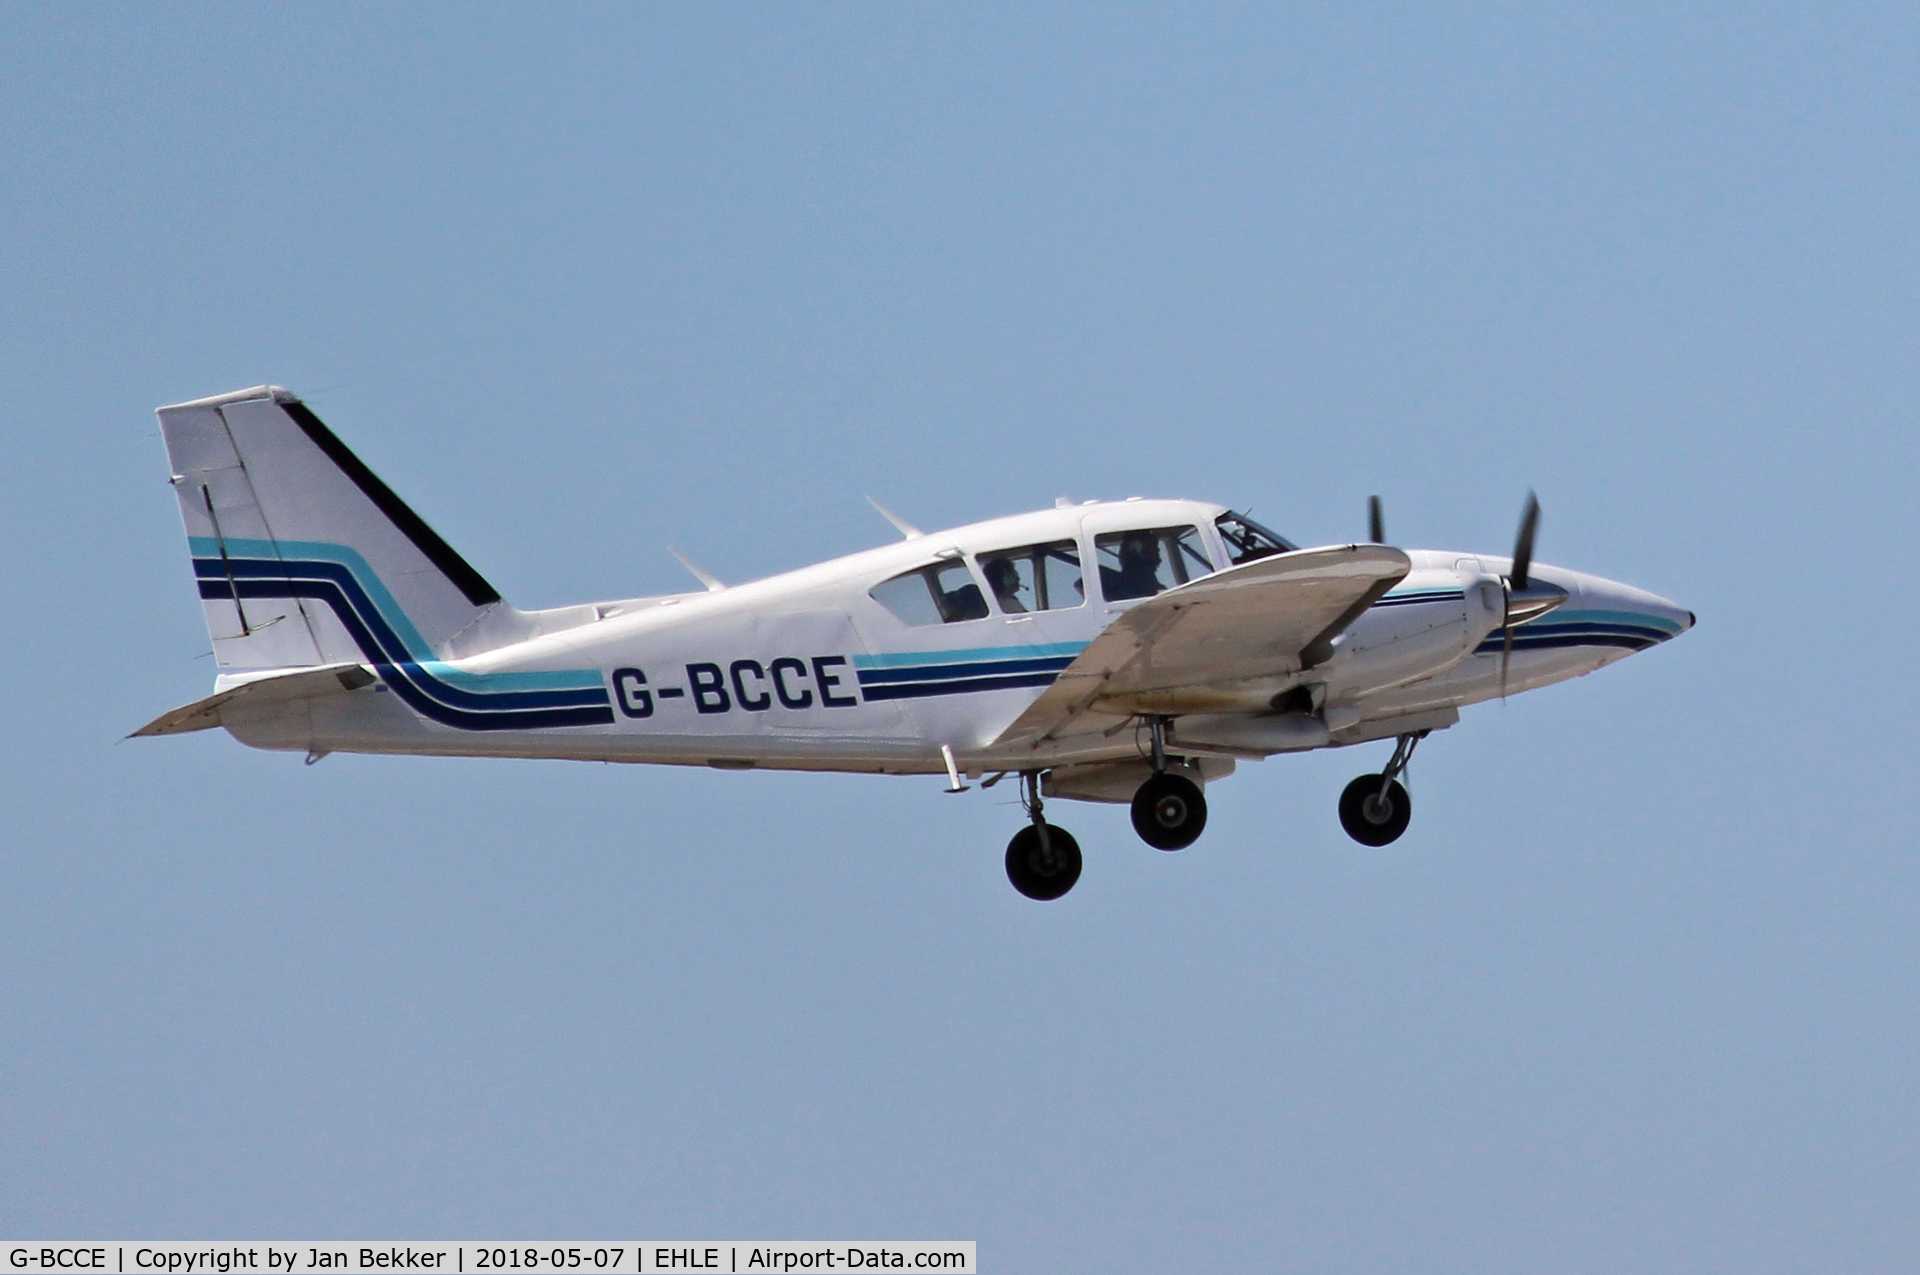 G-BCCE, 1973 Piper PA-23-250 Aztec E C/N 27-7405282, Departure Lelystad Airport